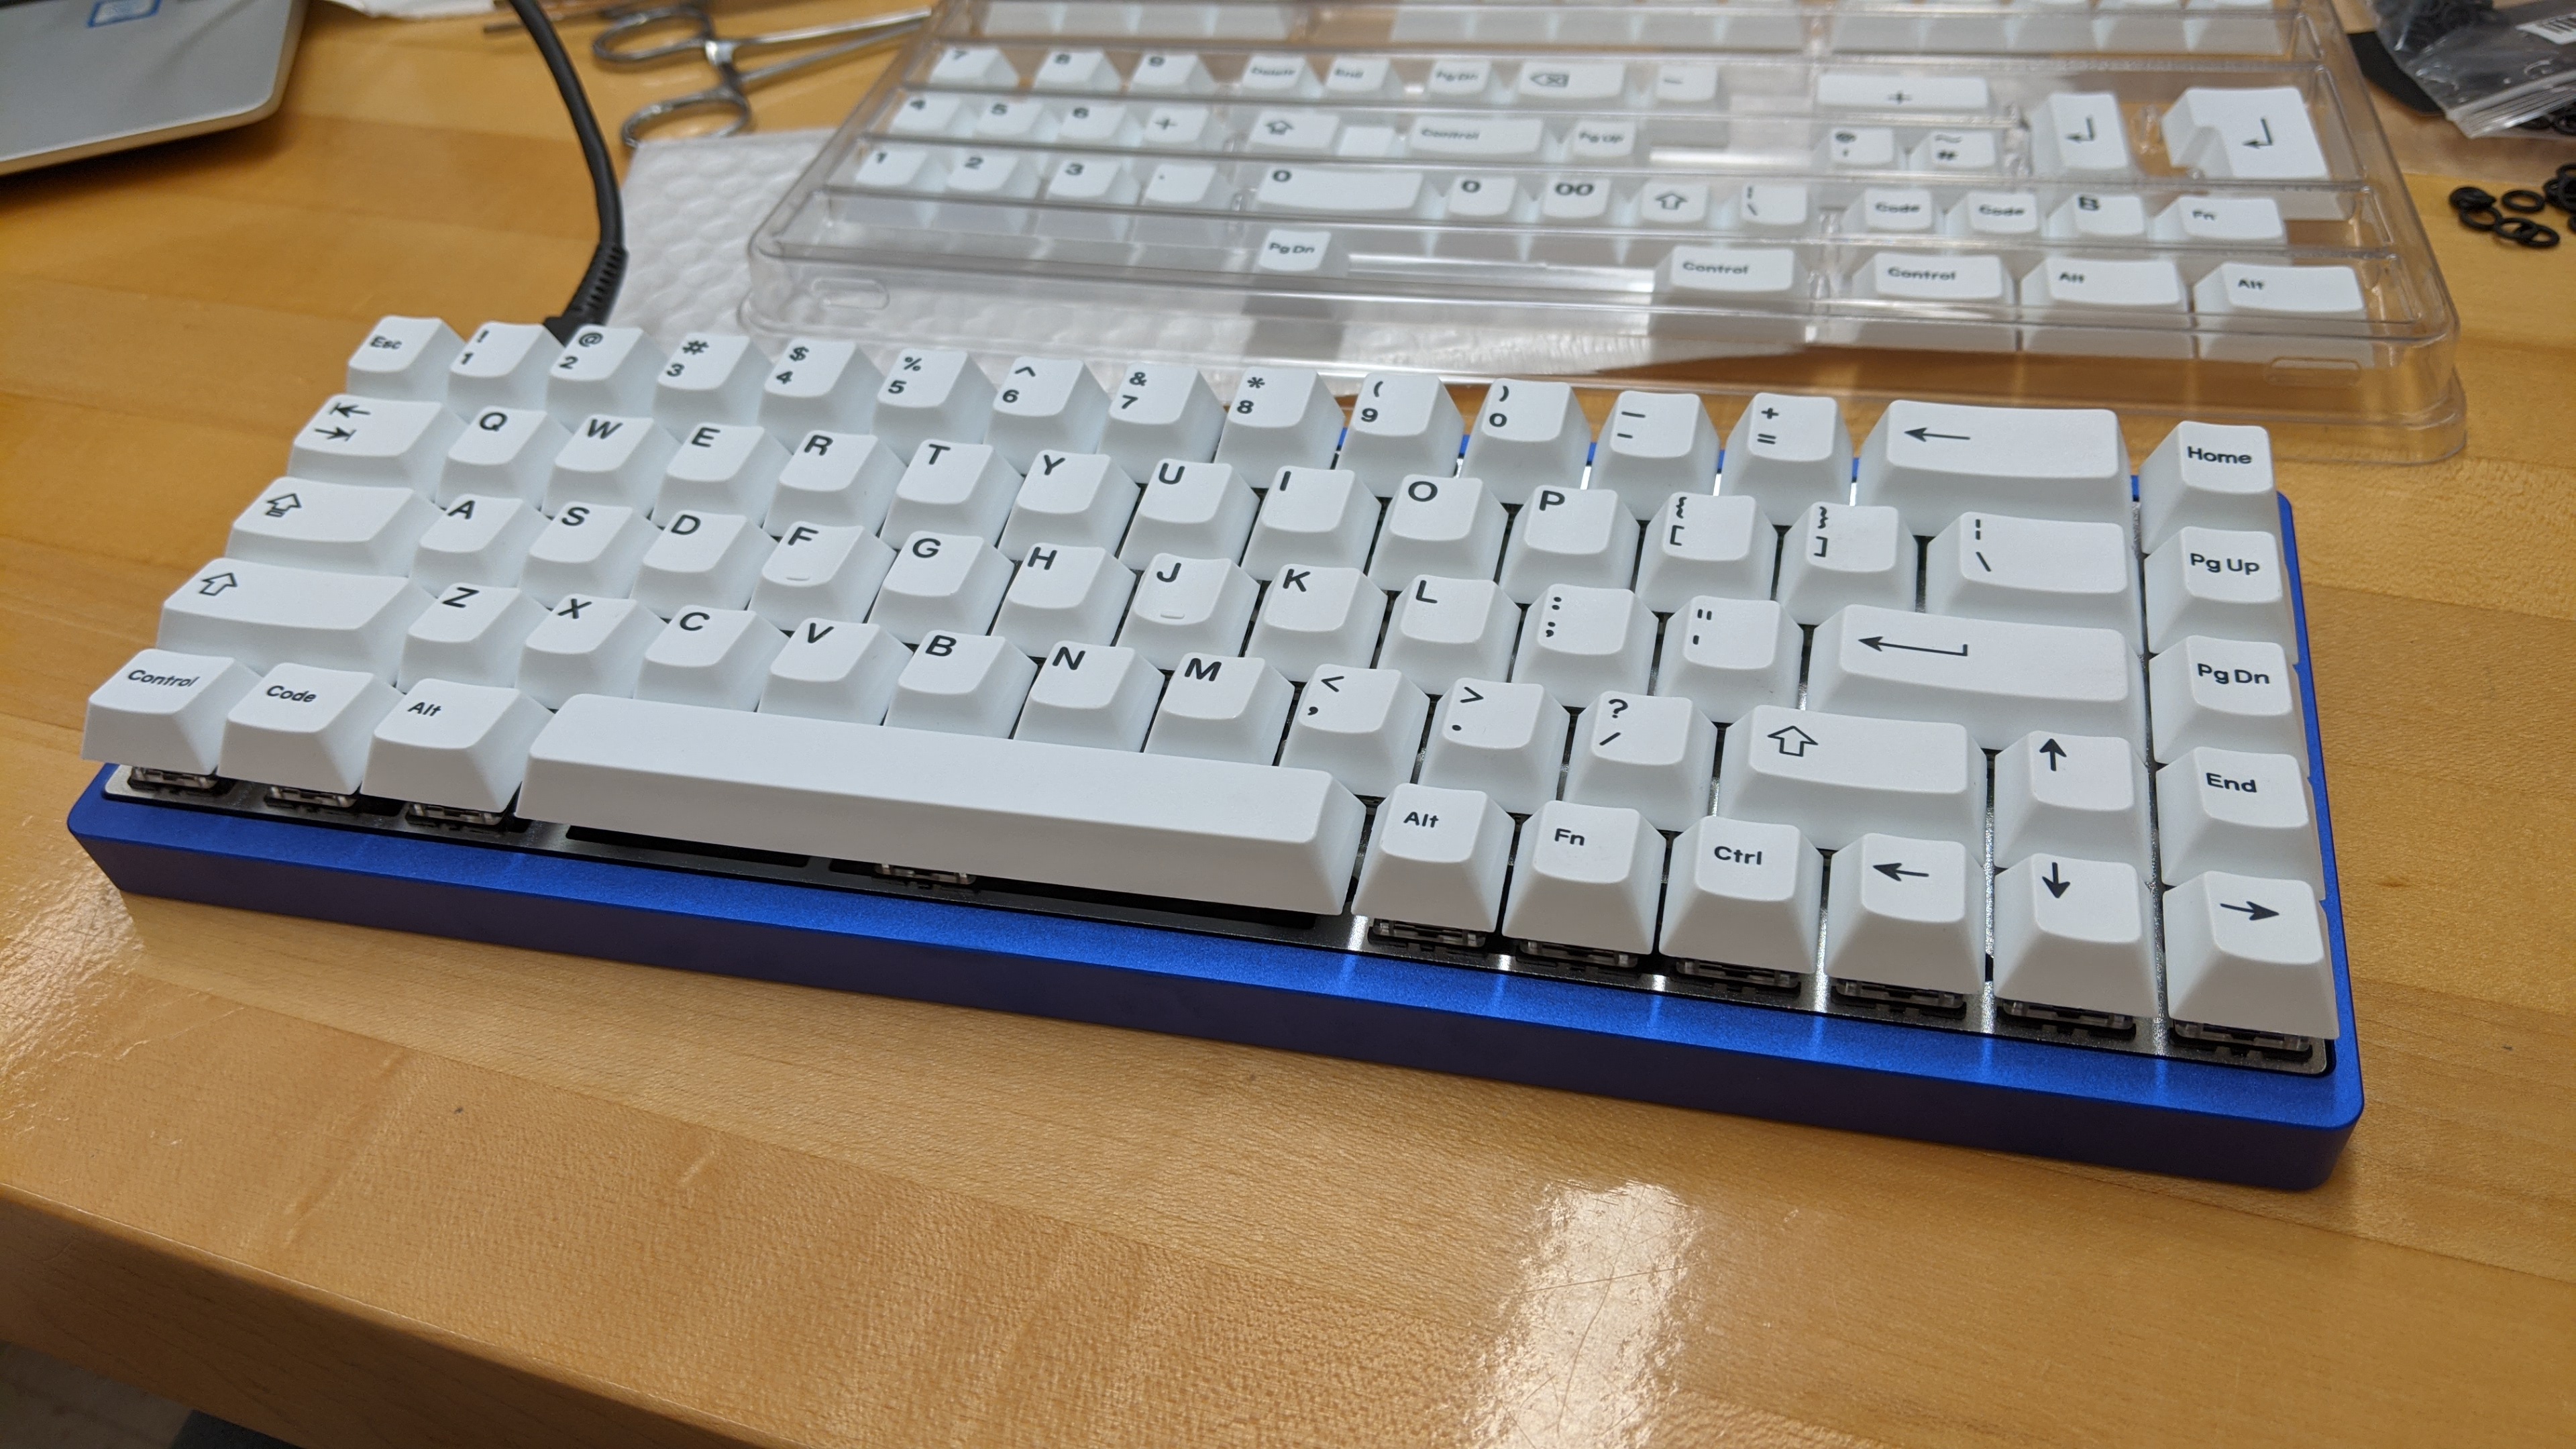 The keyboard, fully assembled. It has a blue case, white keys and black legends.